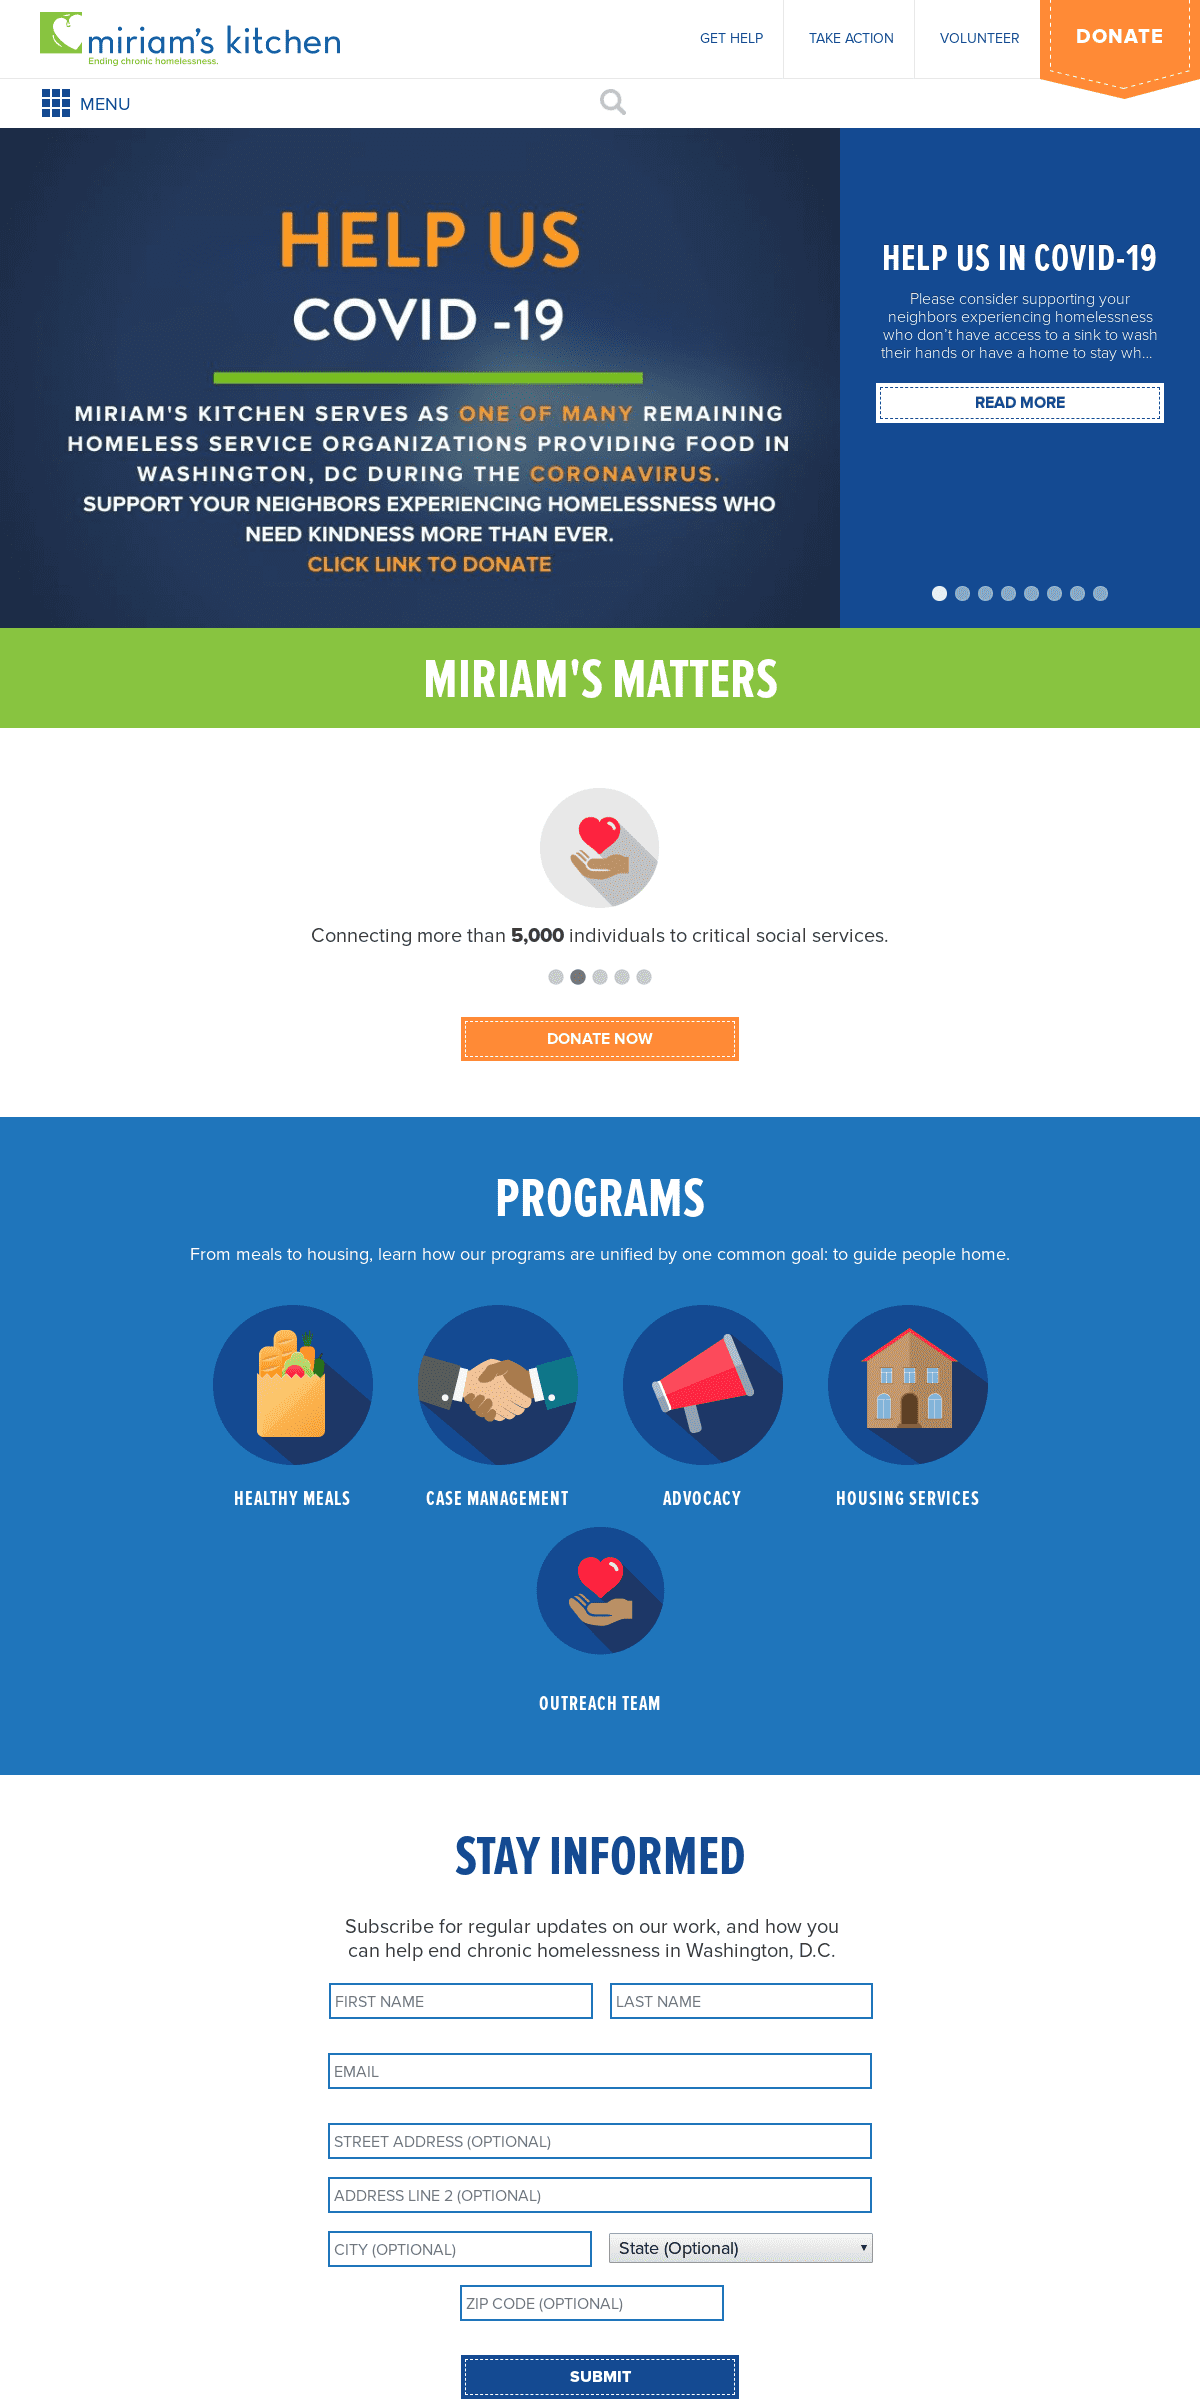 A complete backup of miriamskitchen.org